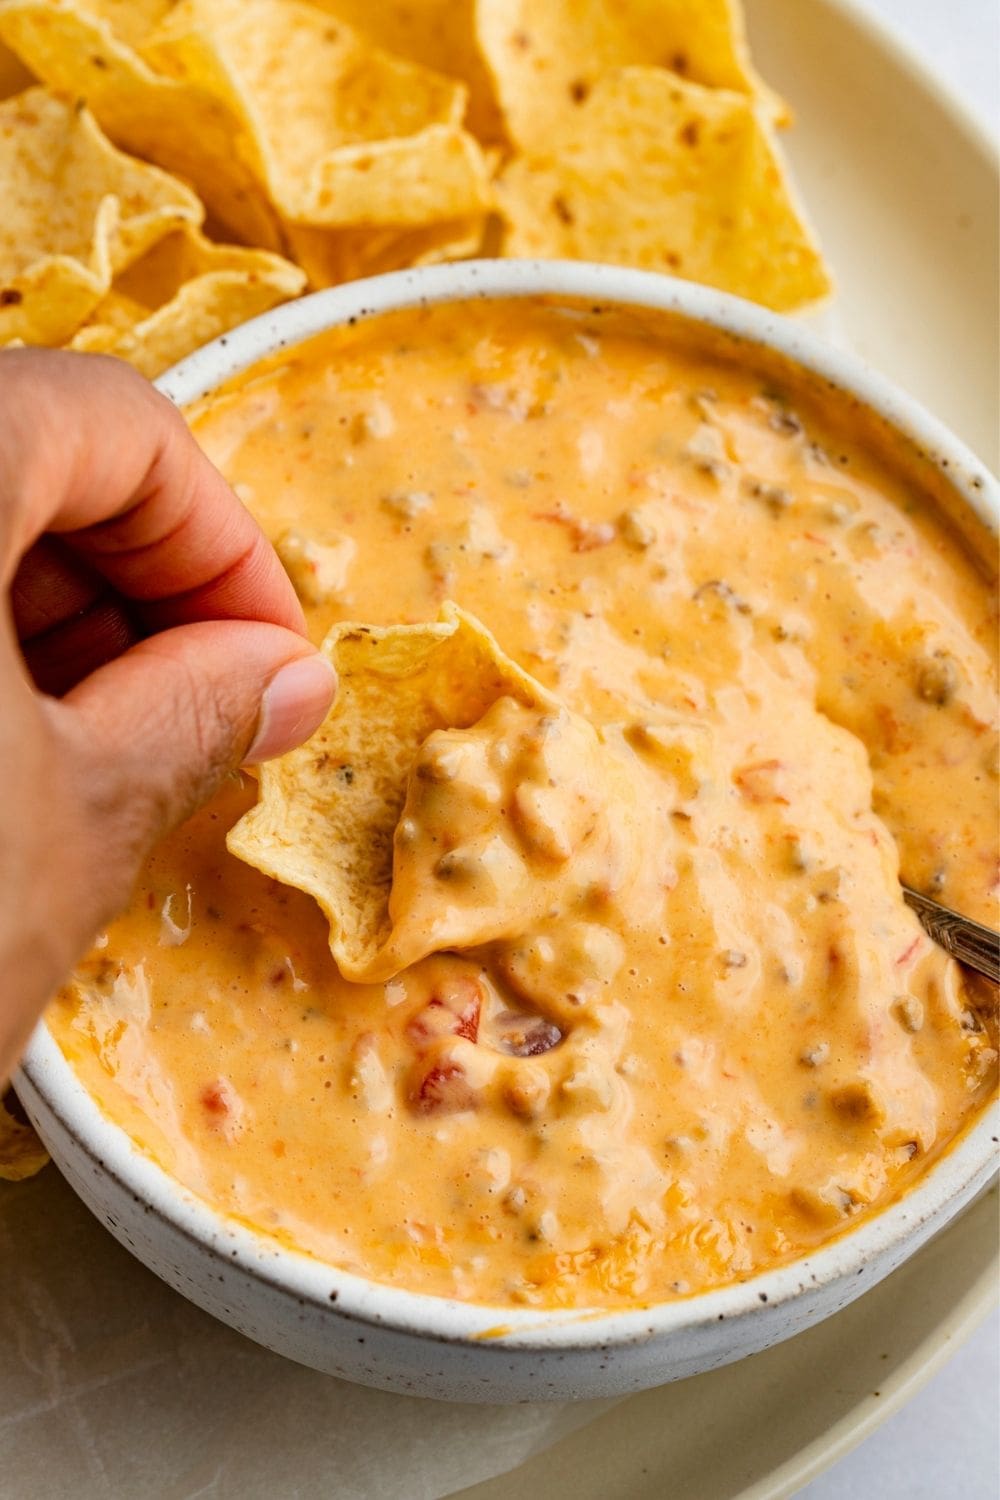 Dipping Tortilla Chips on a Cheesy Sausage Dip